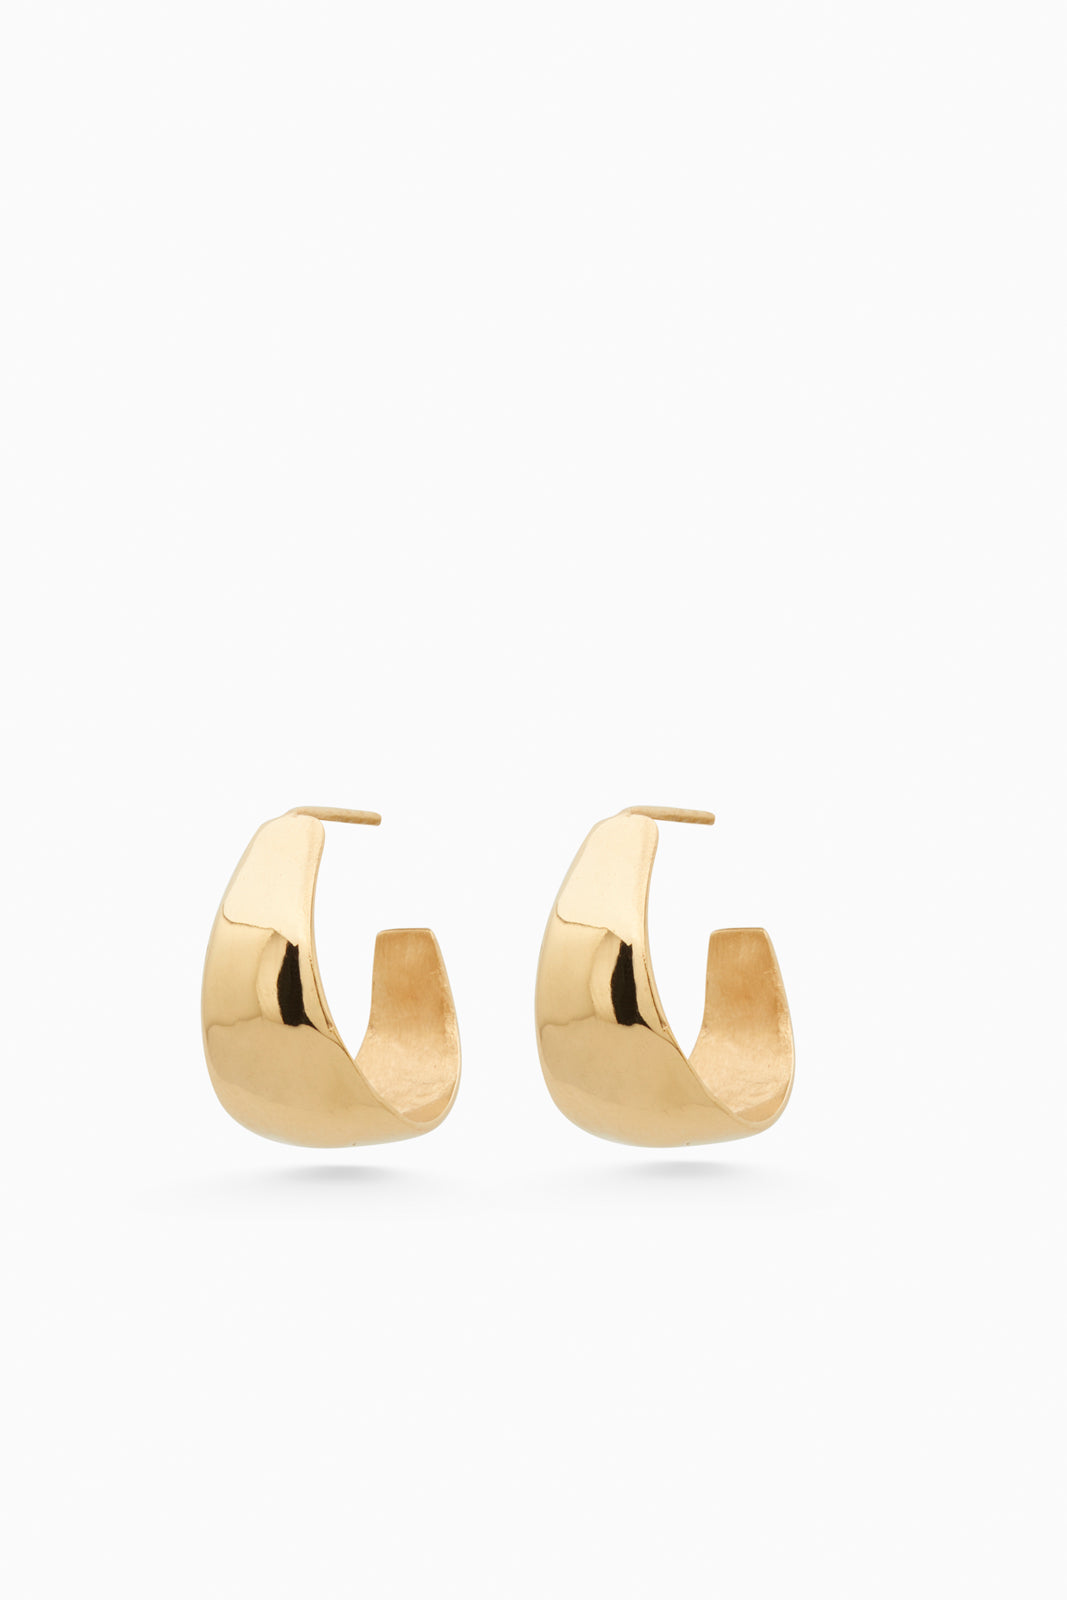 Classic Gold Hoops from Glazd Jewels Gold